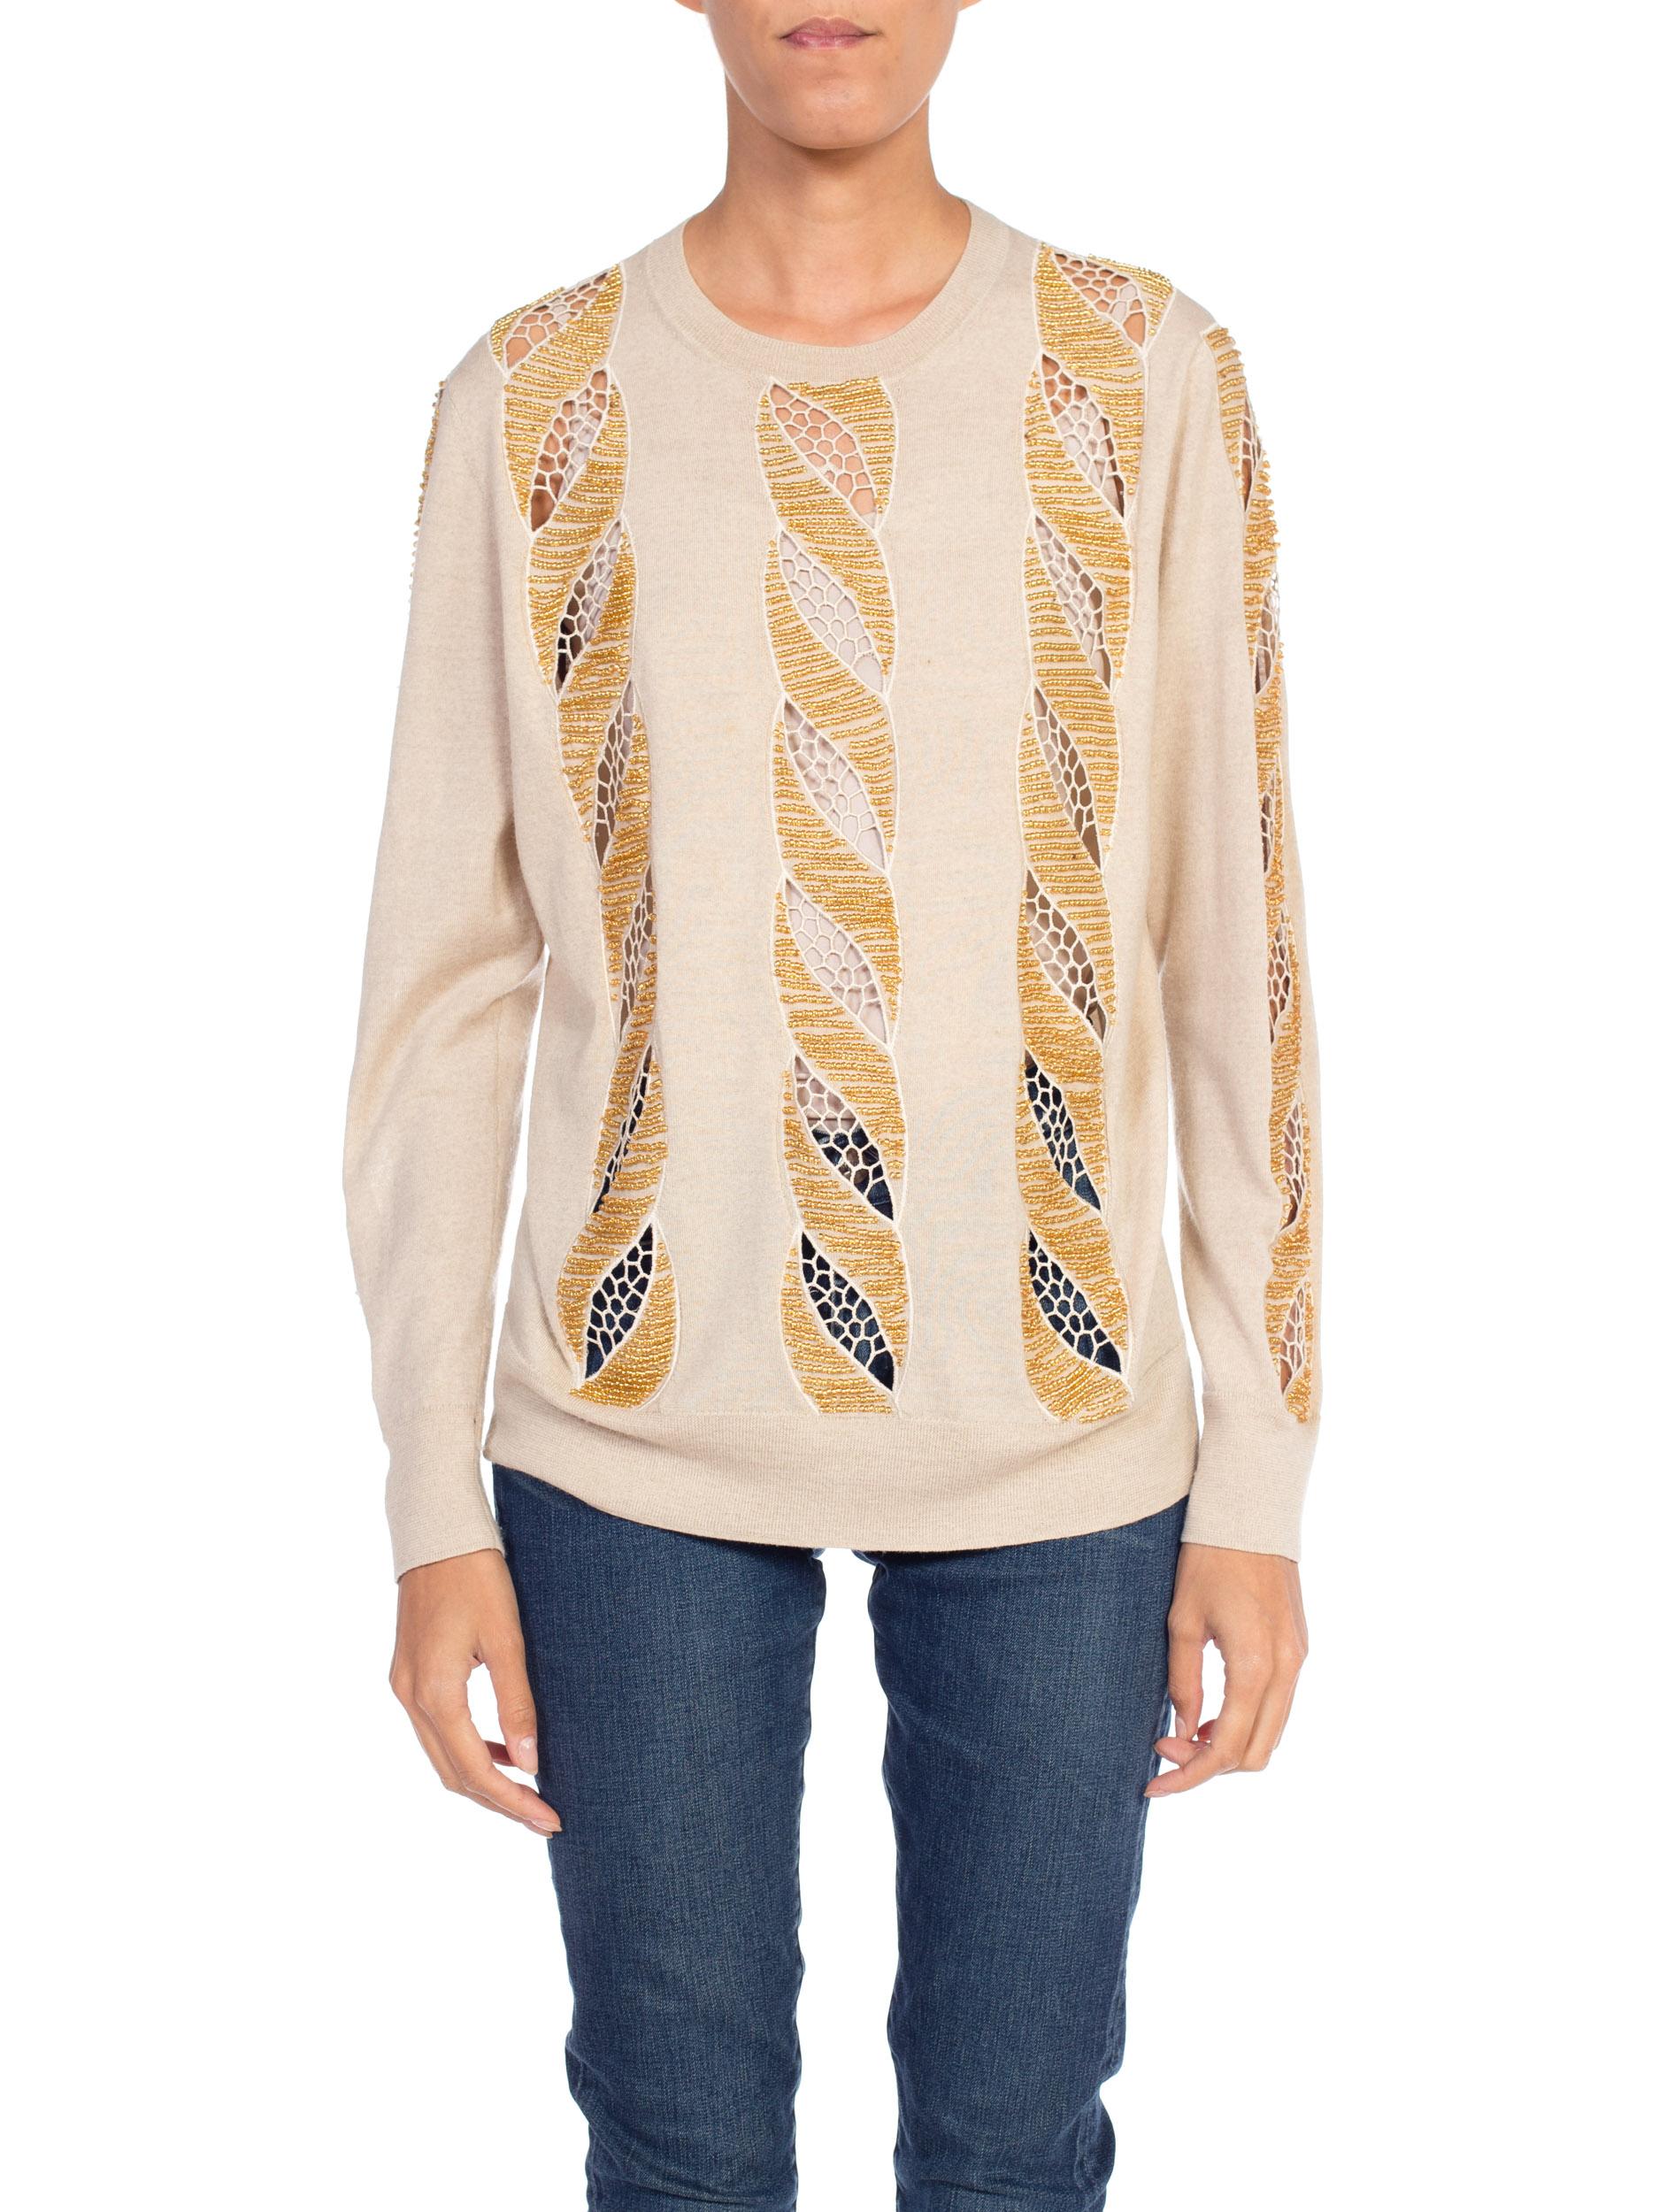 Dries Van Noten Lace Cut Out Gold Beaded Sweater  13